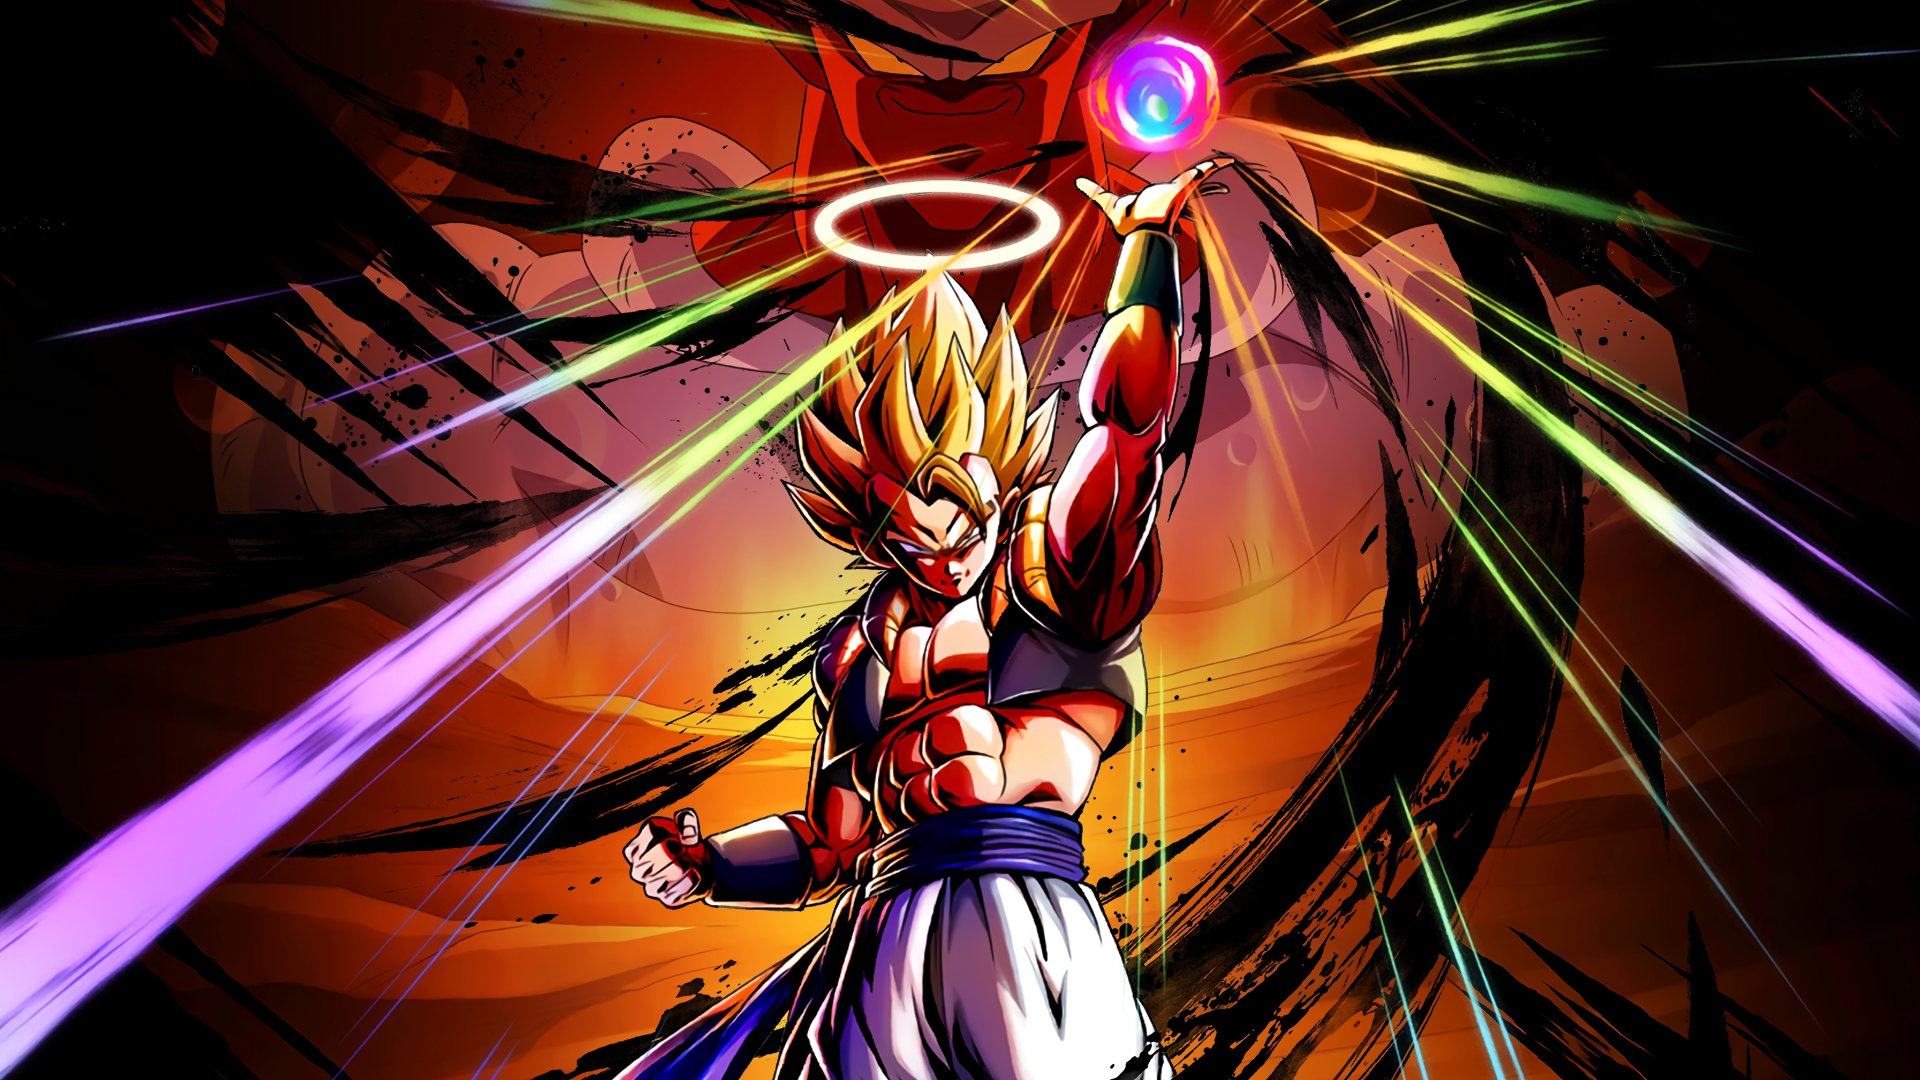 John On Want A Gogeta Wallpaper For Your Pc Well Look